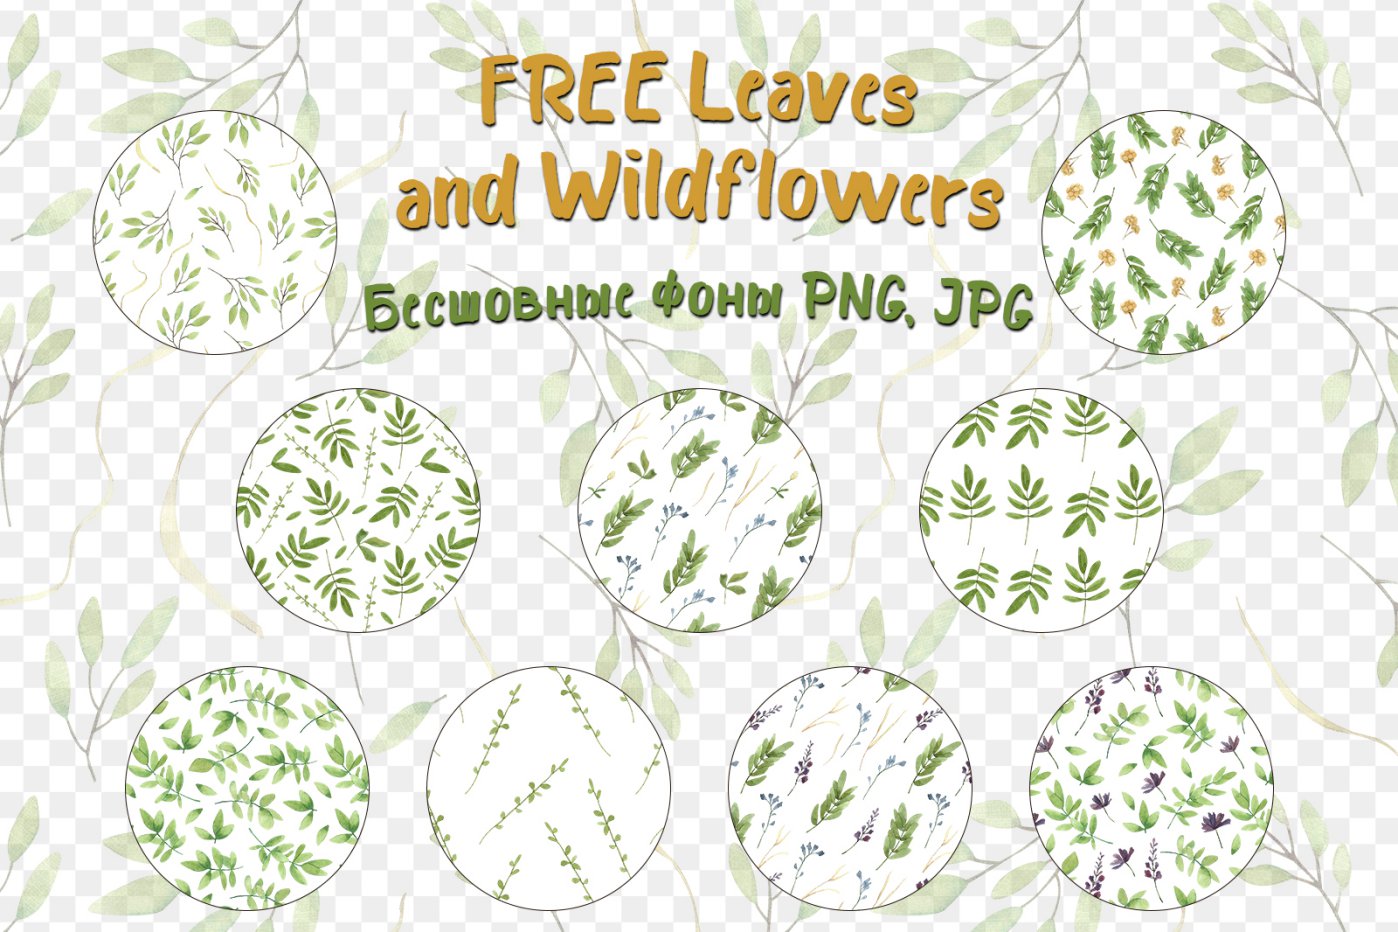 FREE Leaves and Wildflowers patterns png